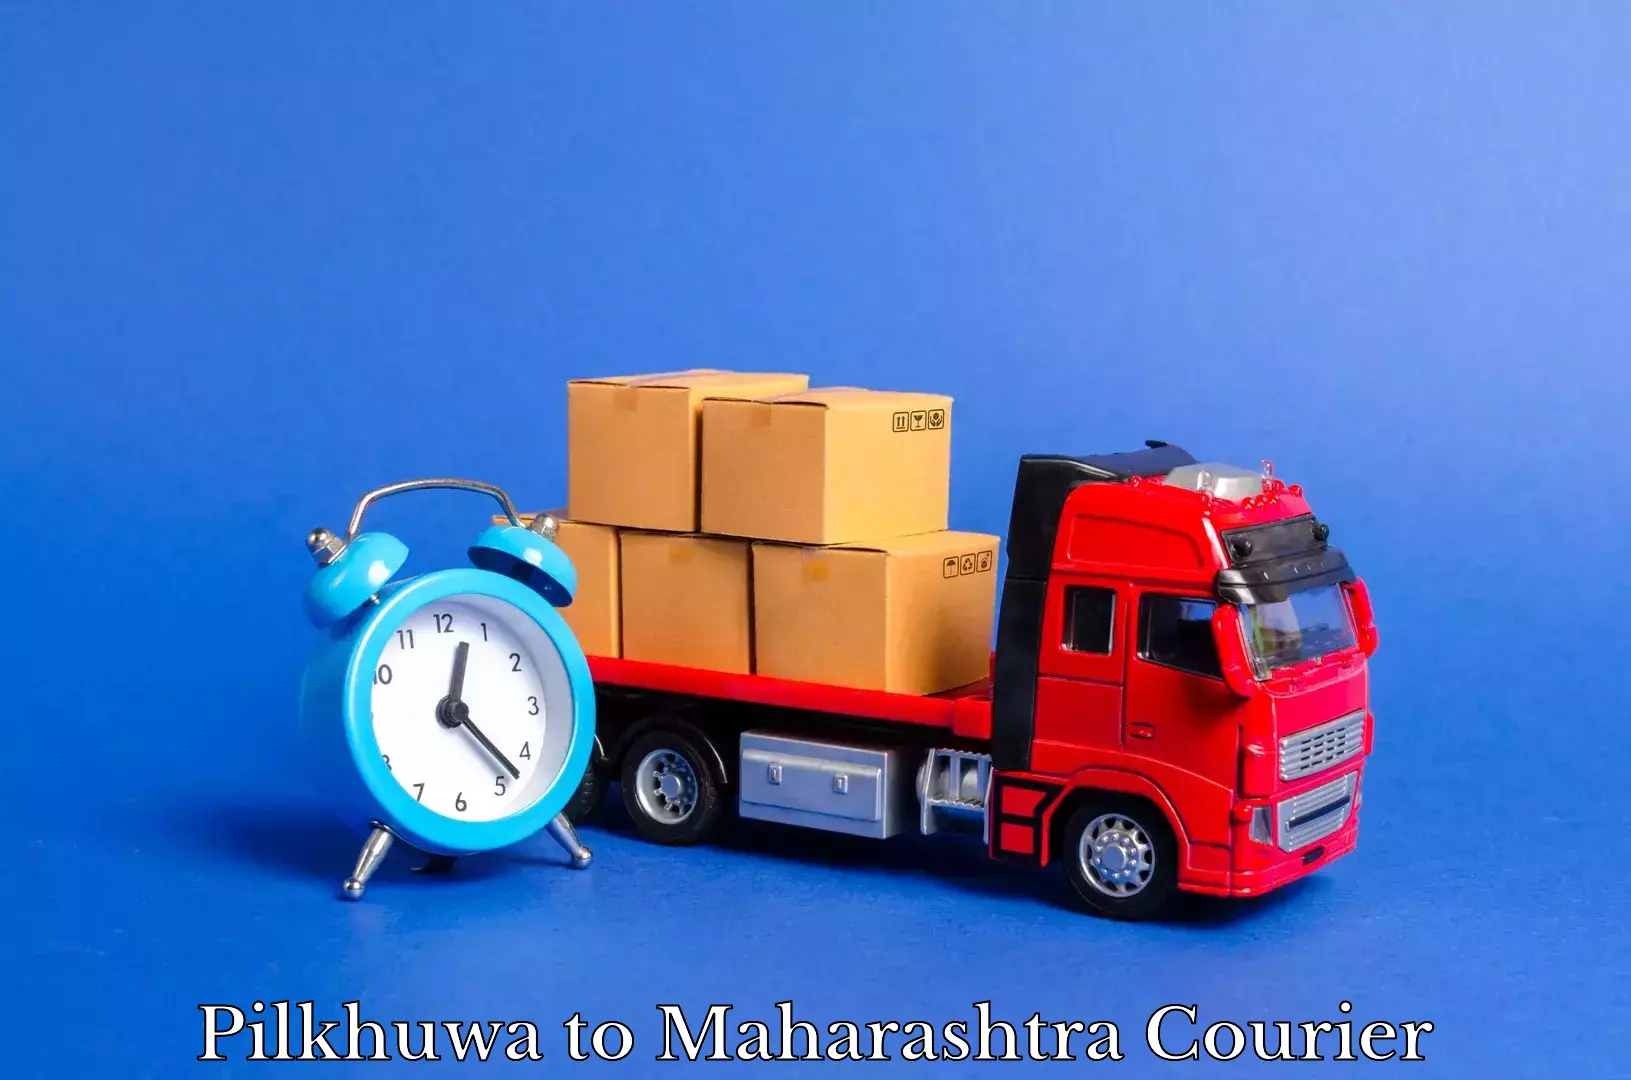 Furniture moving assistance in Pilkhuwa to Maharashtra